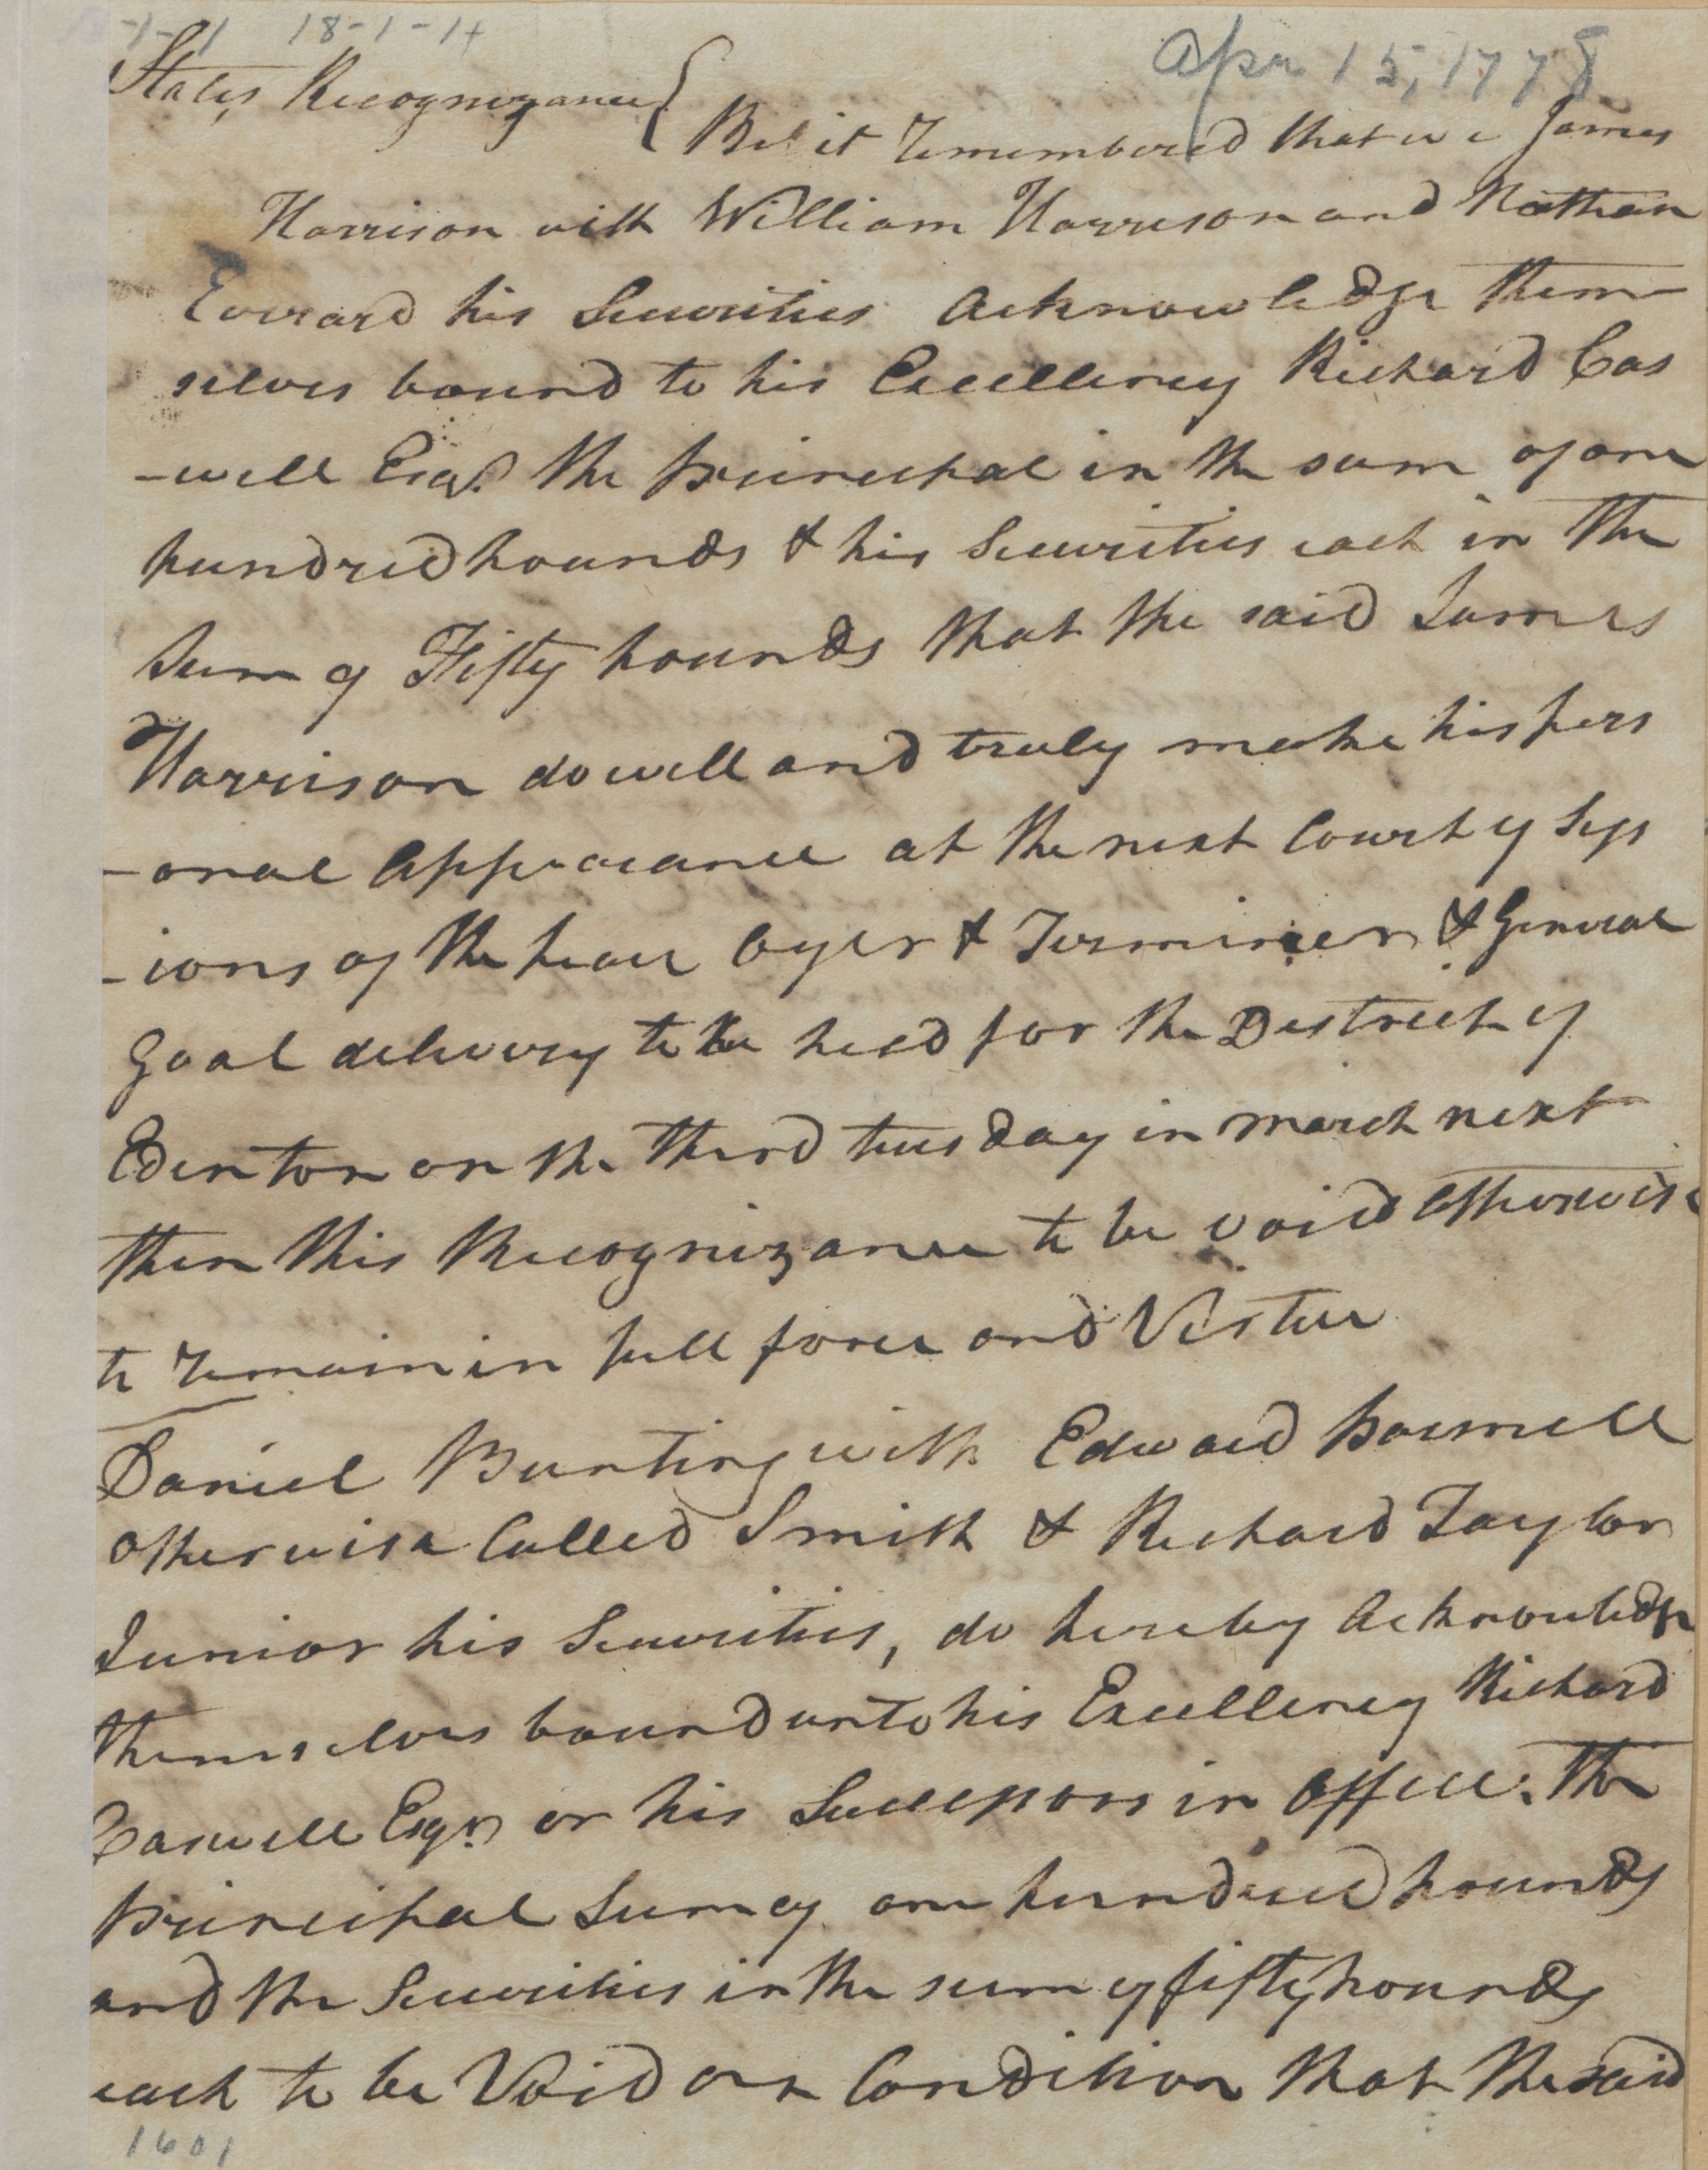 Bond from the Edenton District Court for James Harrison, Daniel Bunting, et. al., circa 10 October 1777, page 1